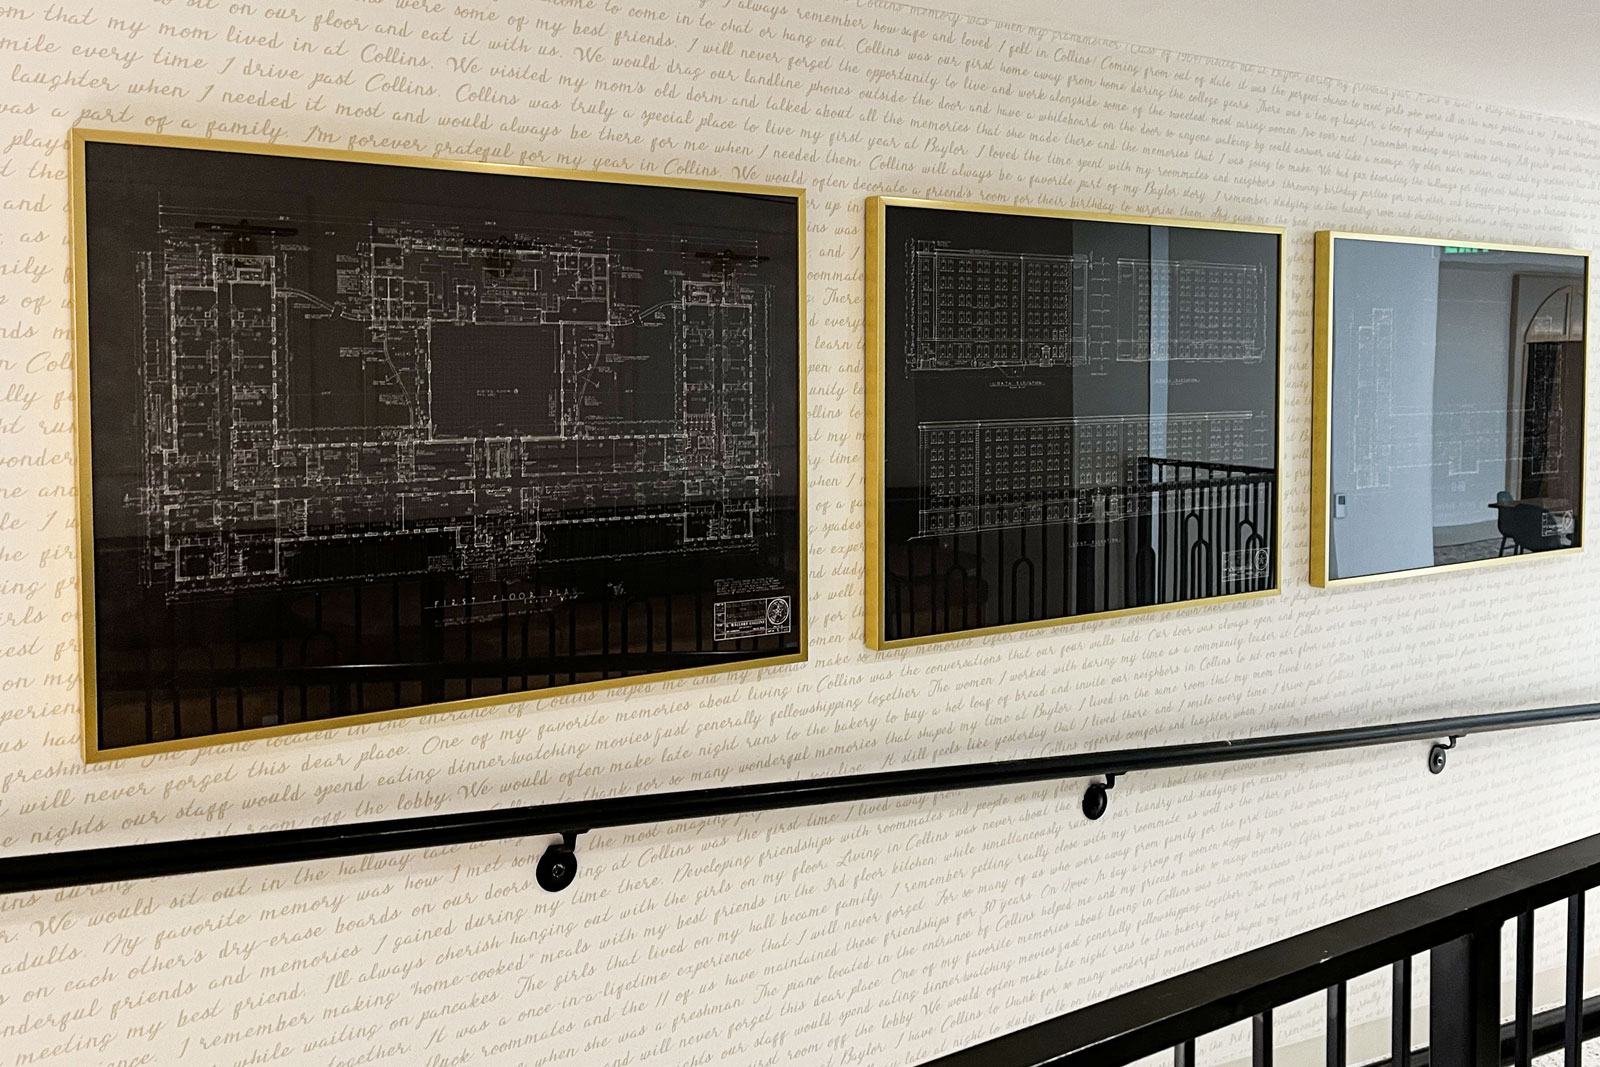 Memories of previous residents at Collins are preserved in the inscriptions printed on wallpaper displayed with the original blueprints of the building.